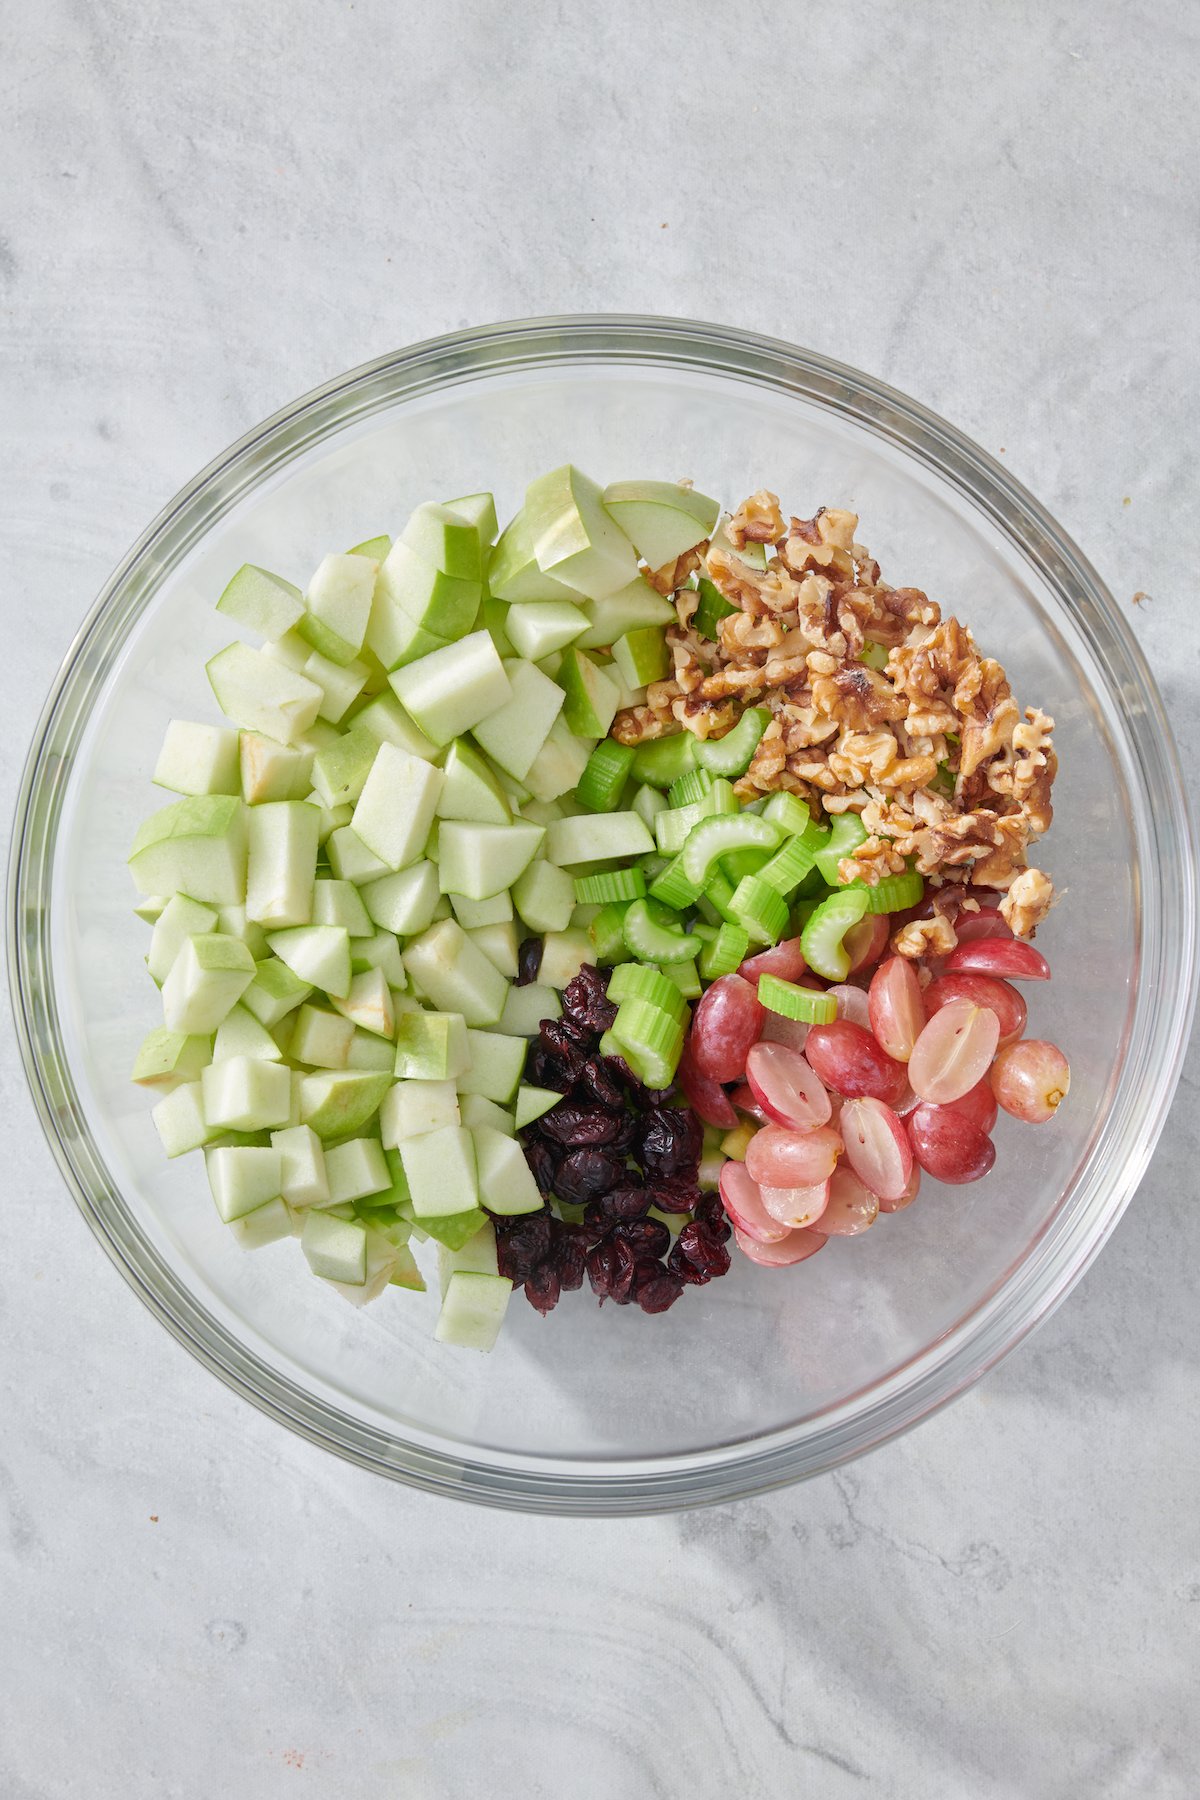 Celery, apples, walnuts, grapes and cranberries in mixing bowl.